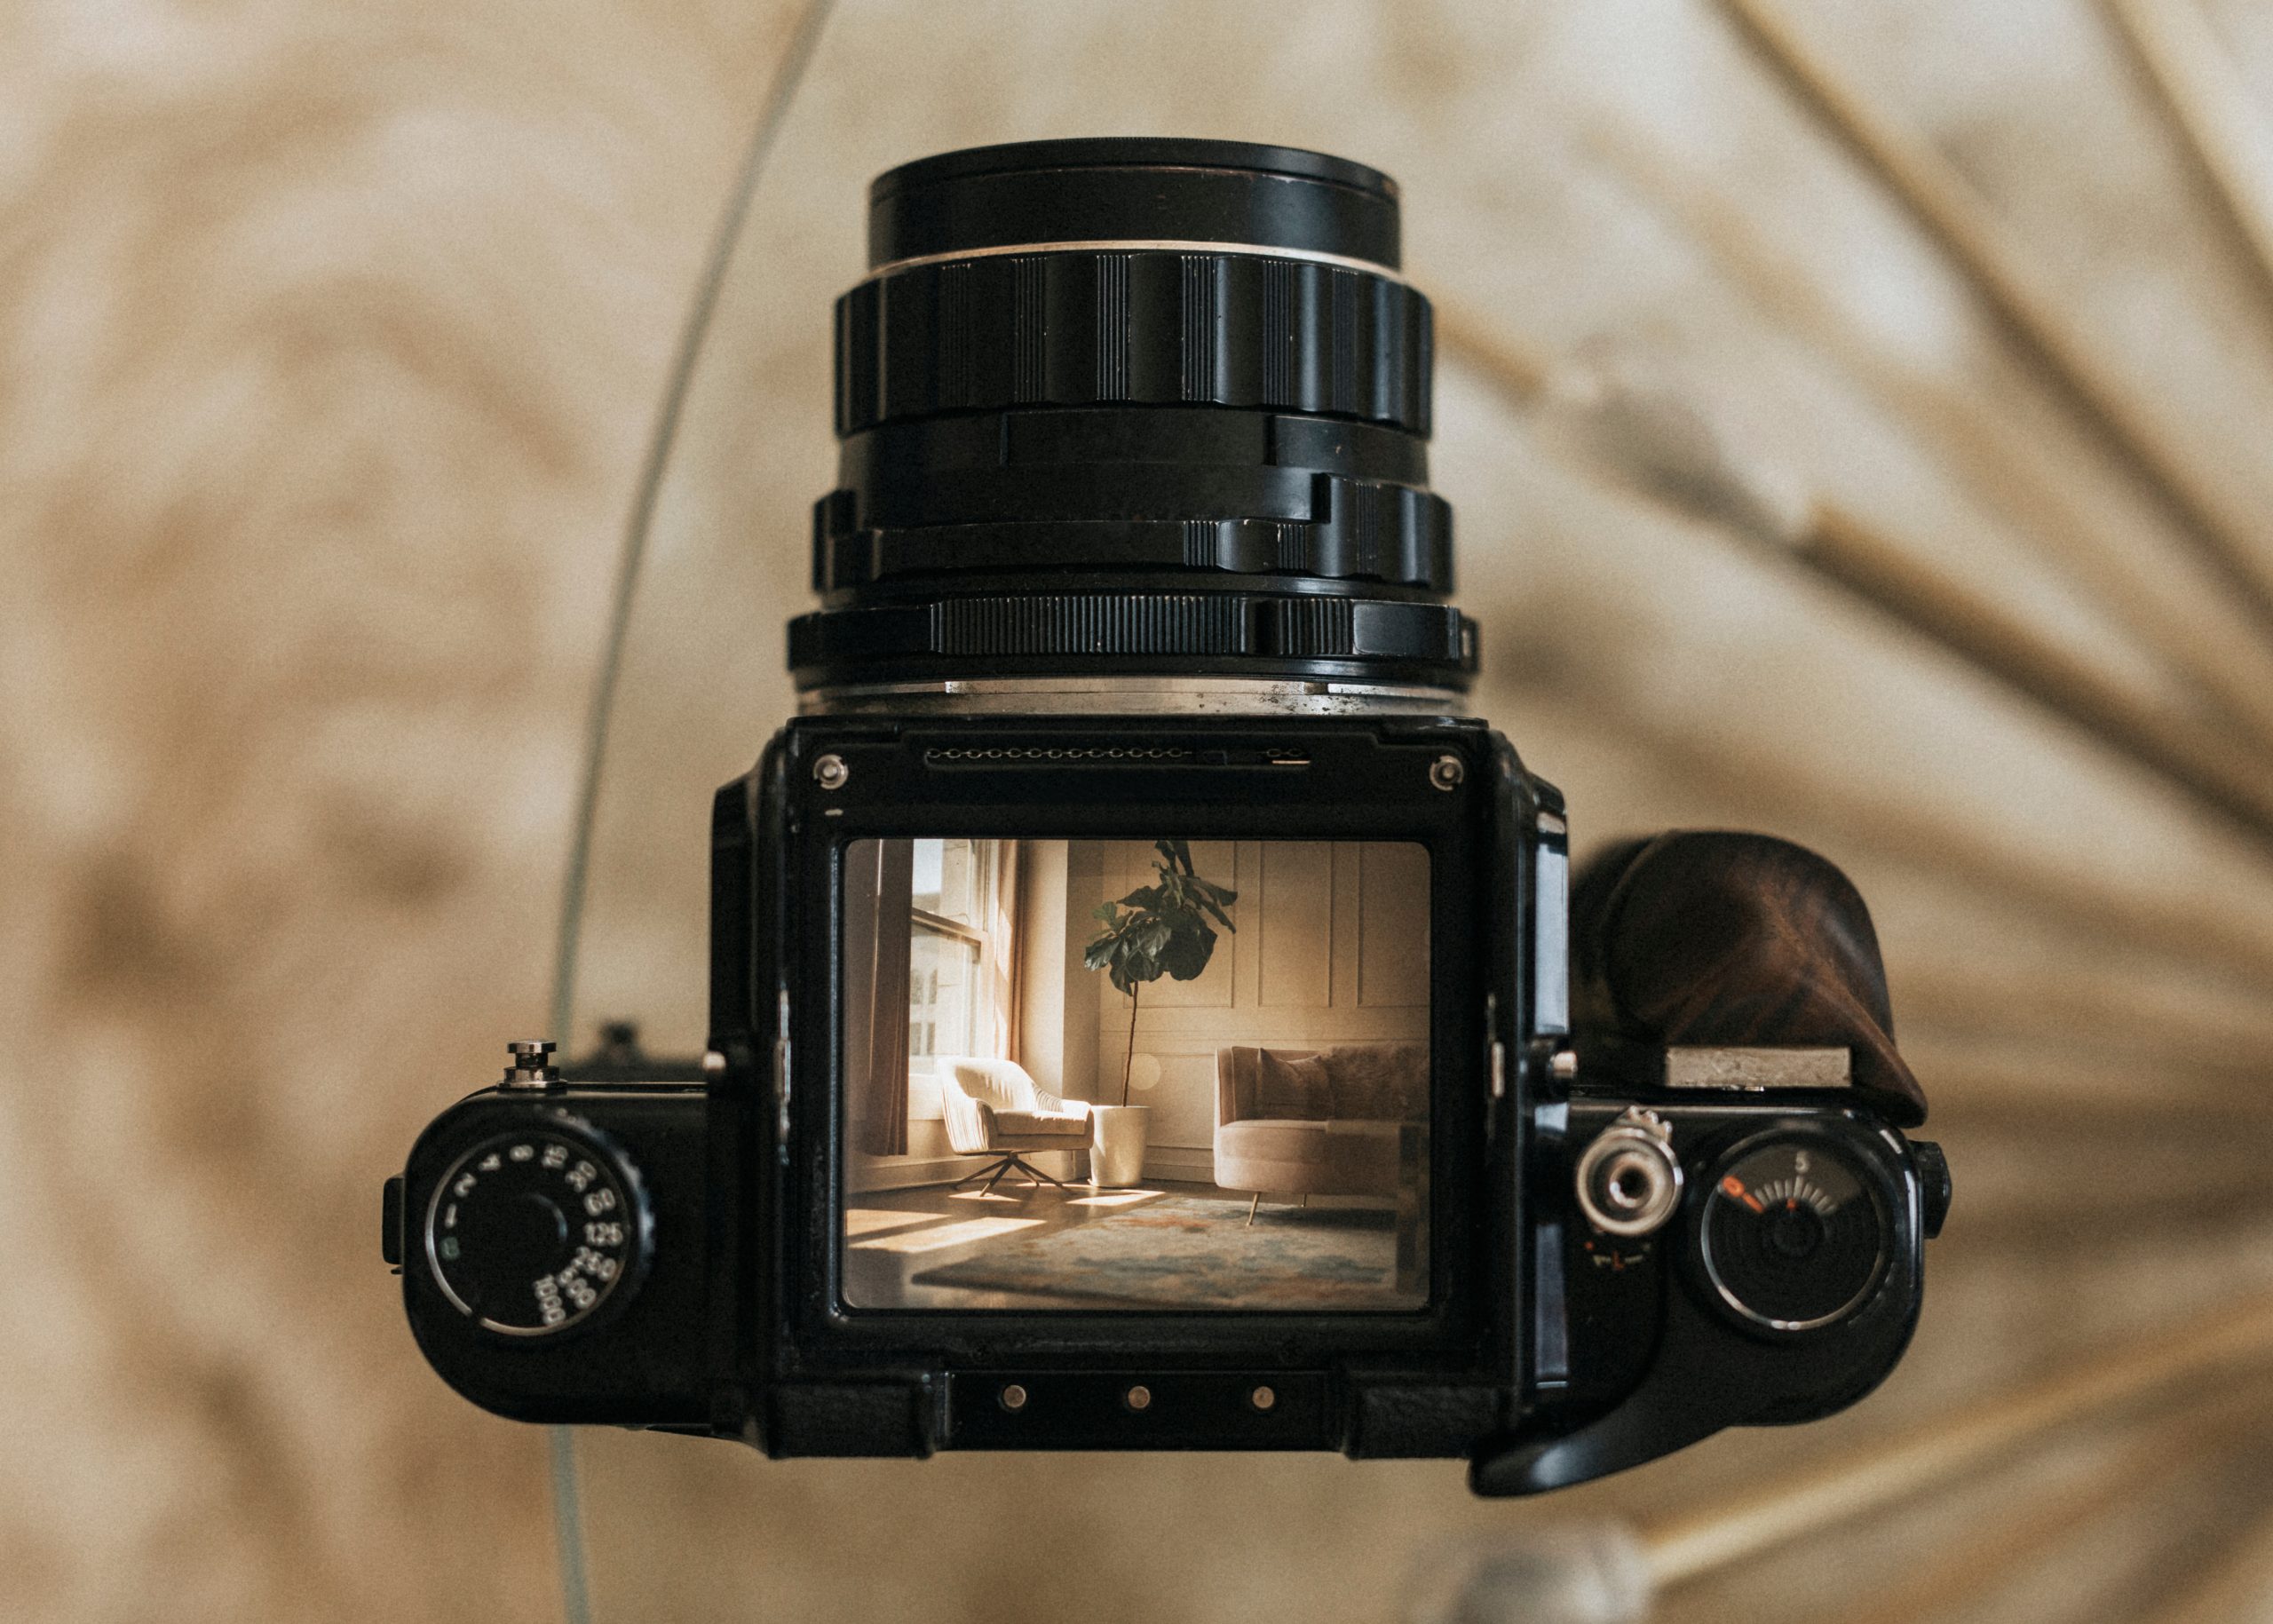 Living room interior through the lens of an analog camera to illustrate a real estate photoshoot